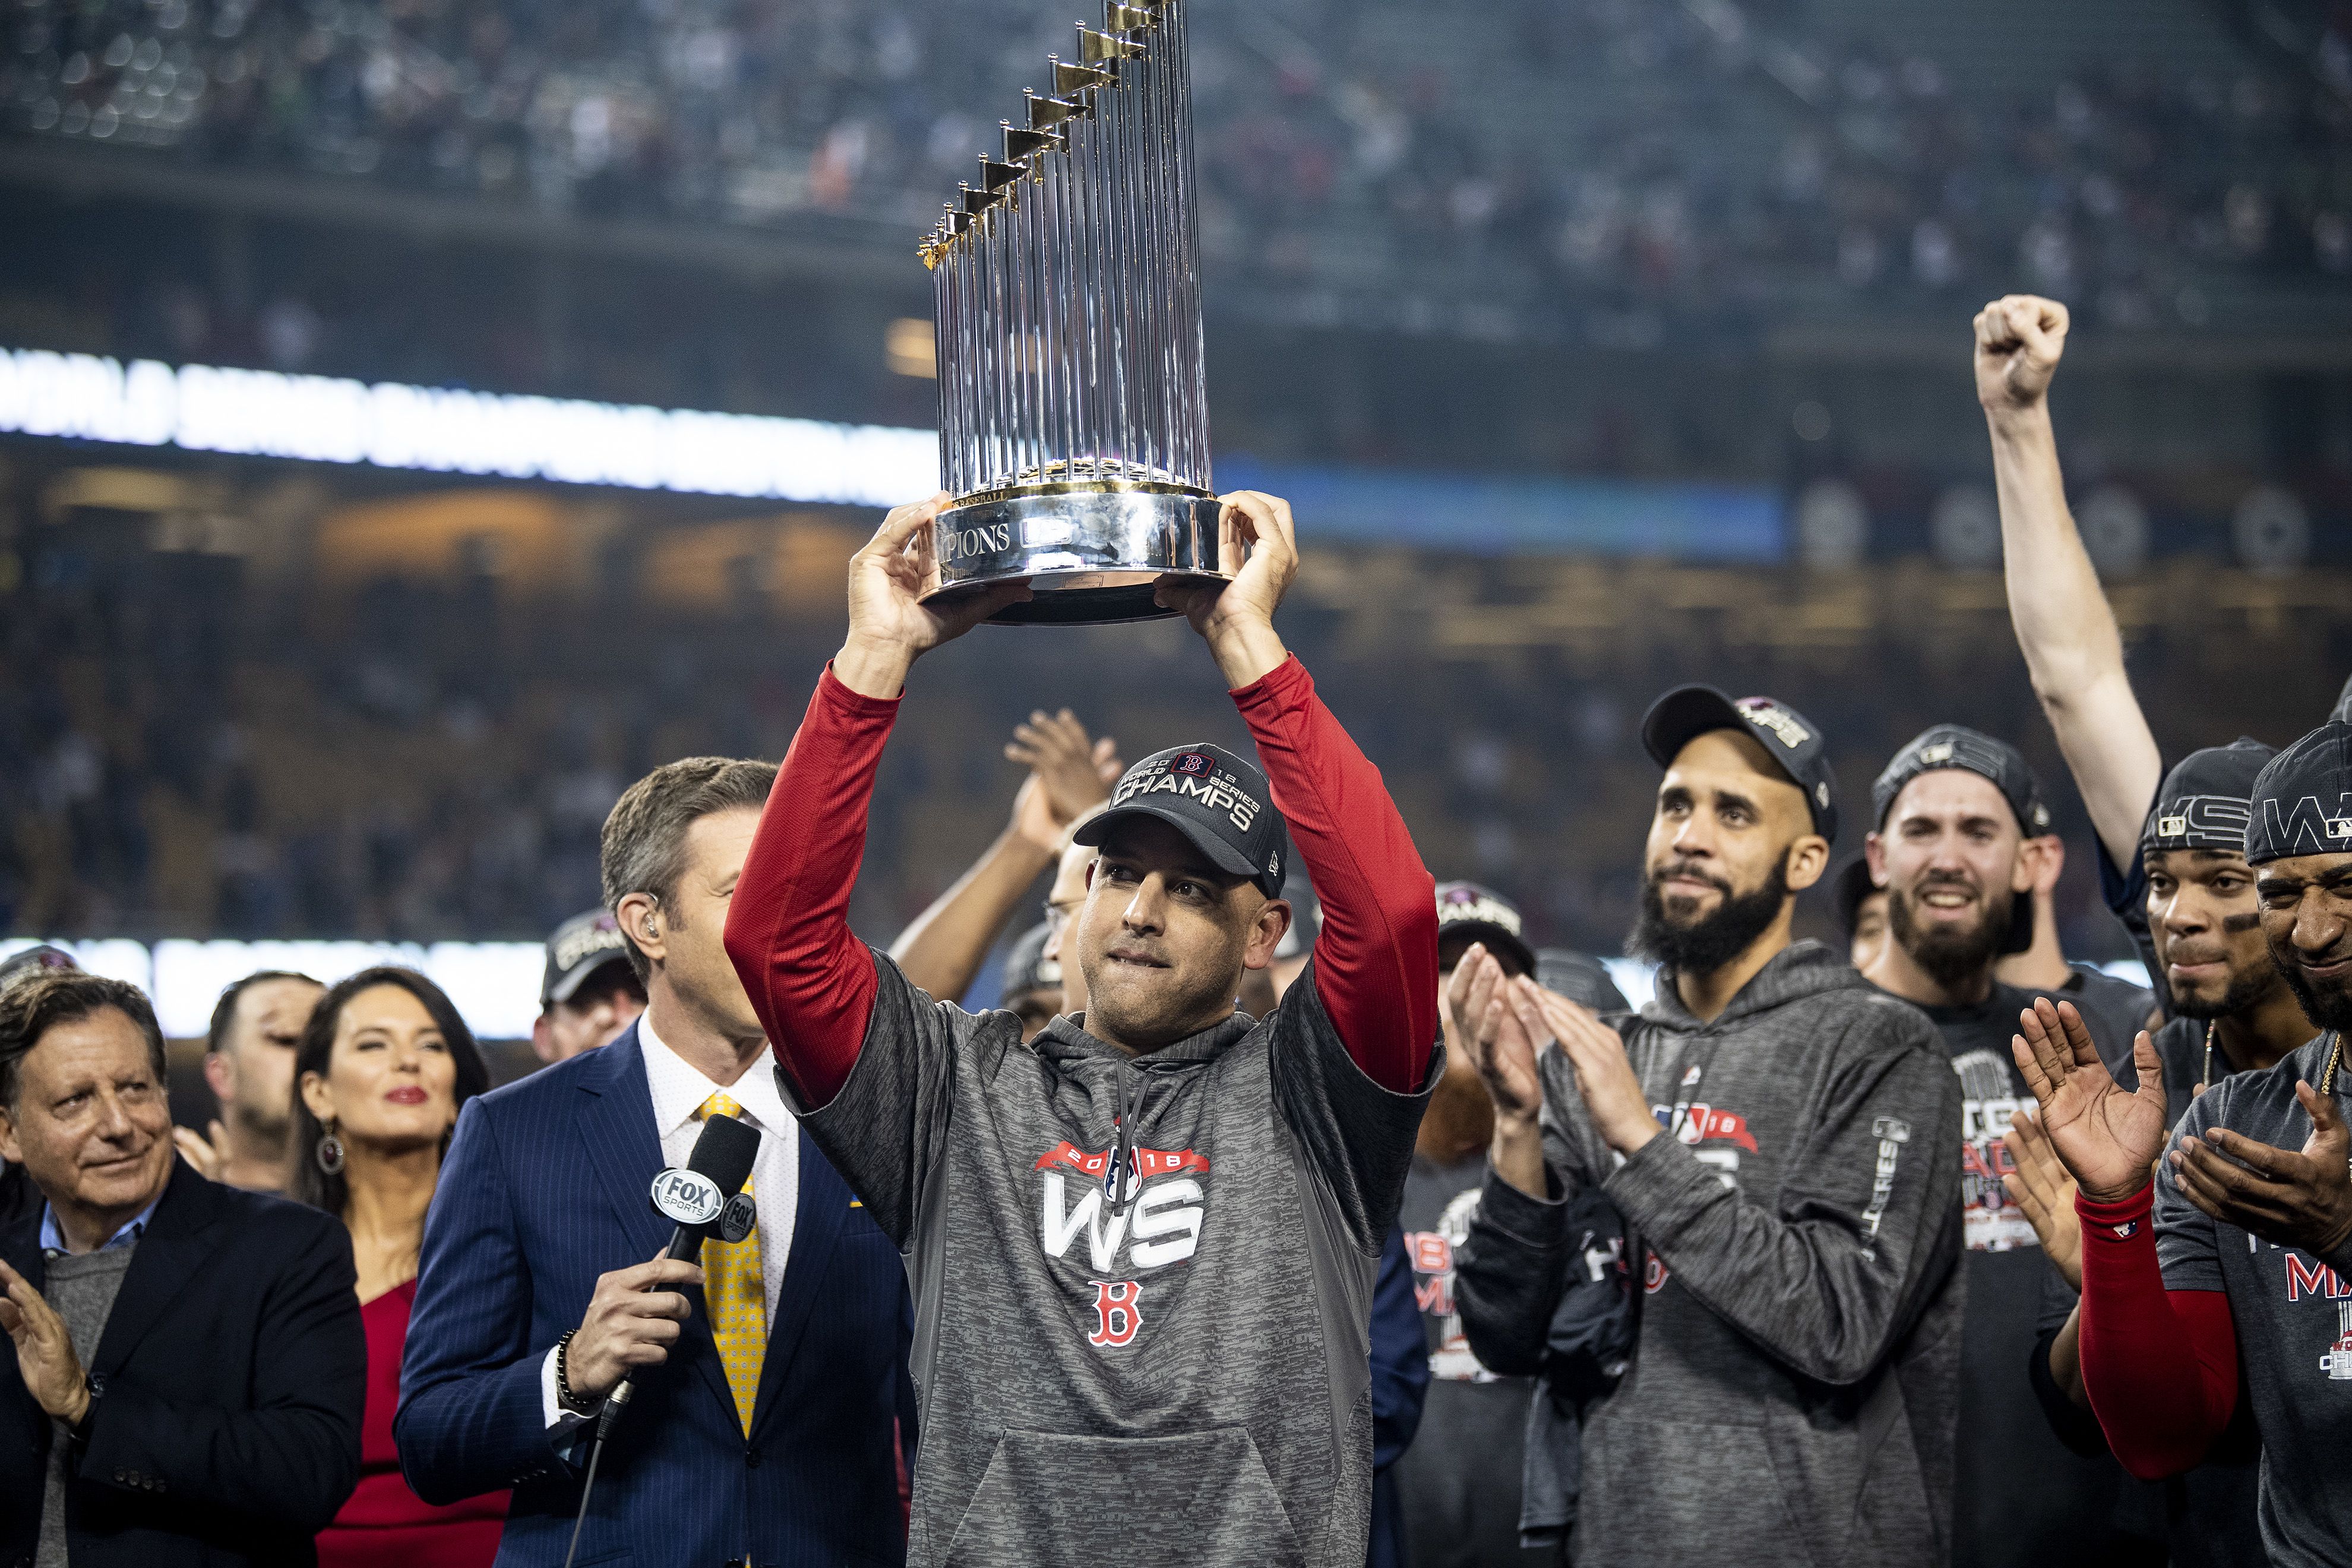 The Boston Red Sox are Your 2018 World Series Champions